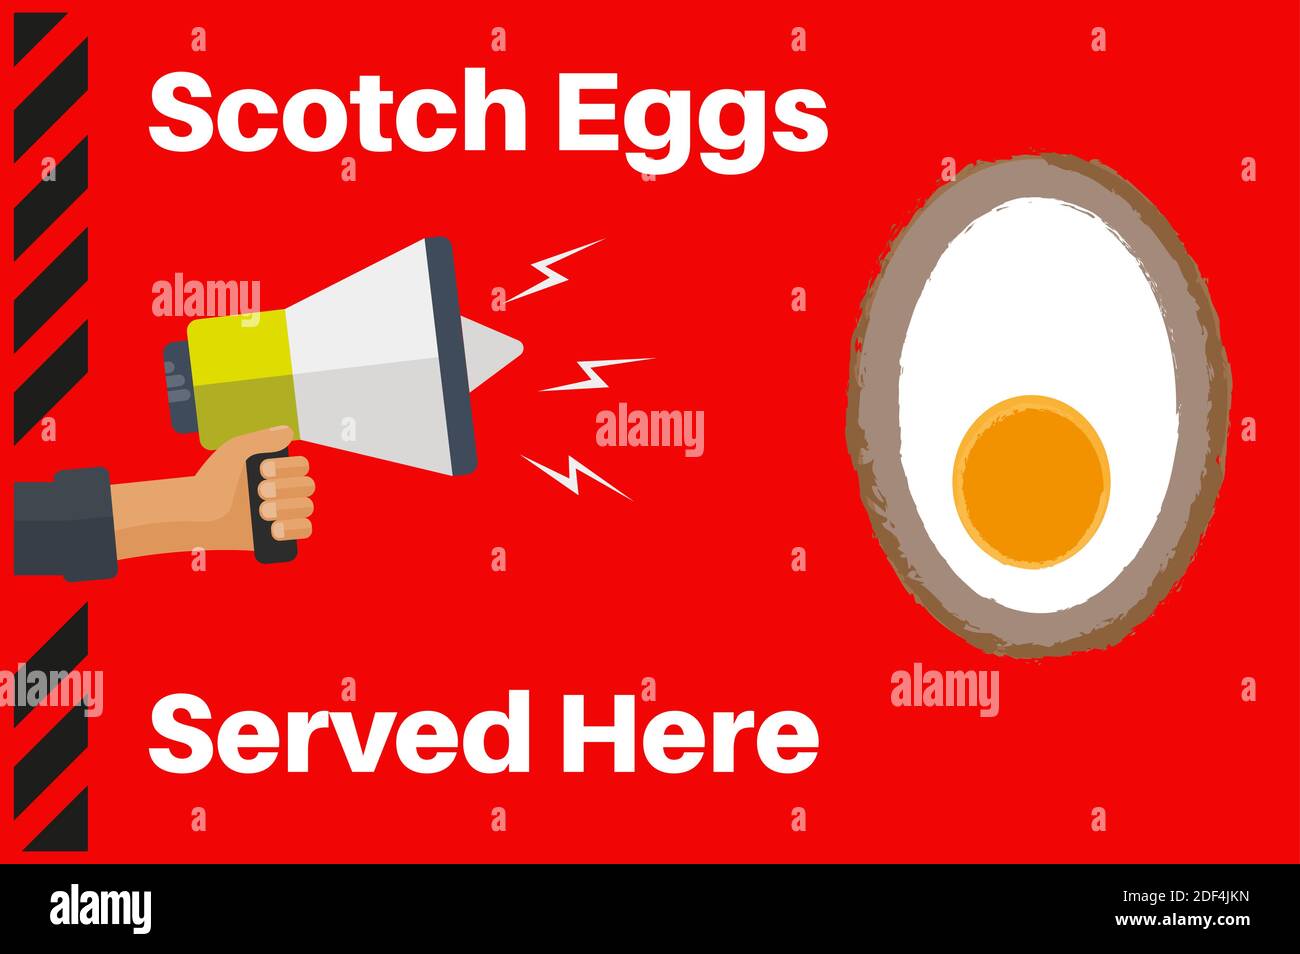 Scotch Eggs served here vector illustration on a red background Stock Vector